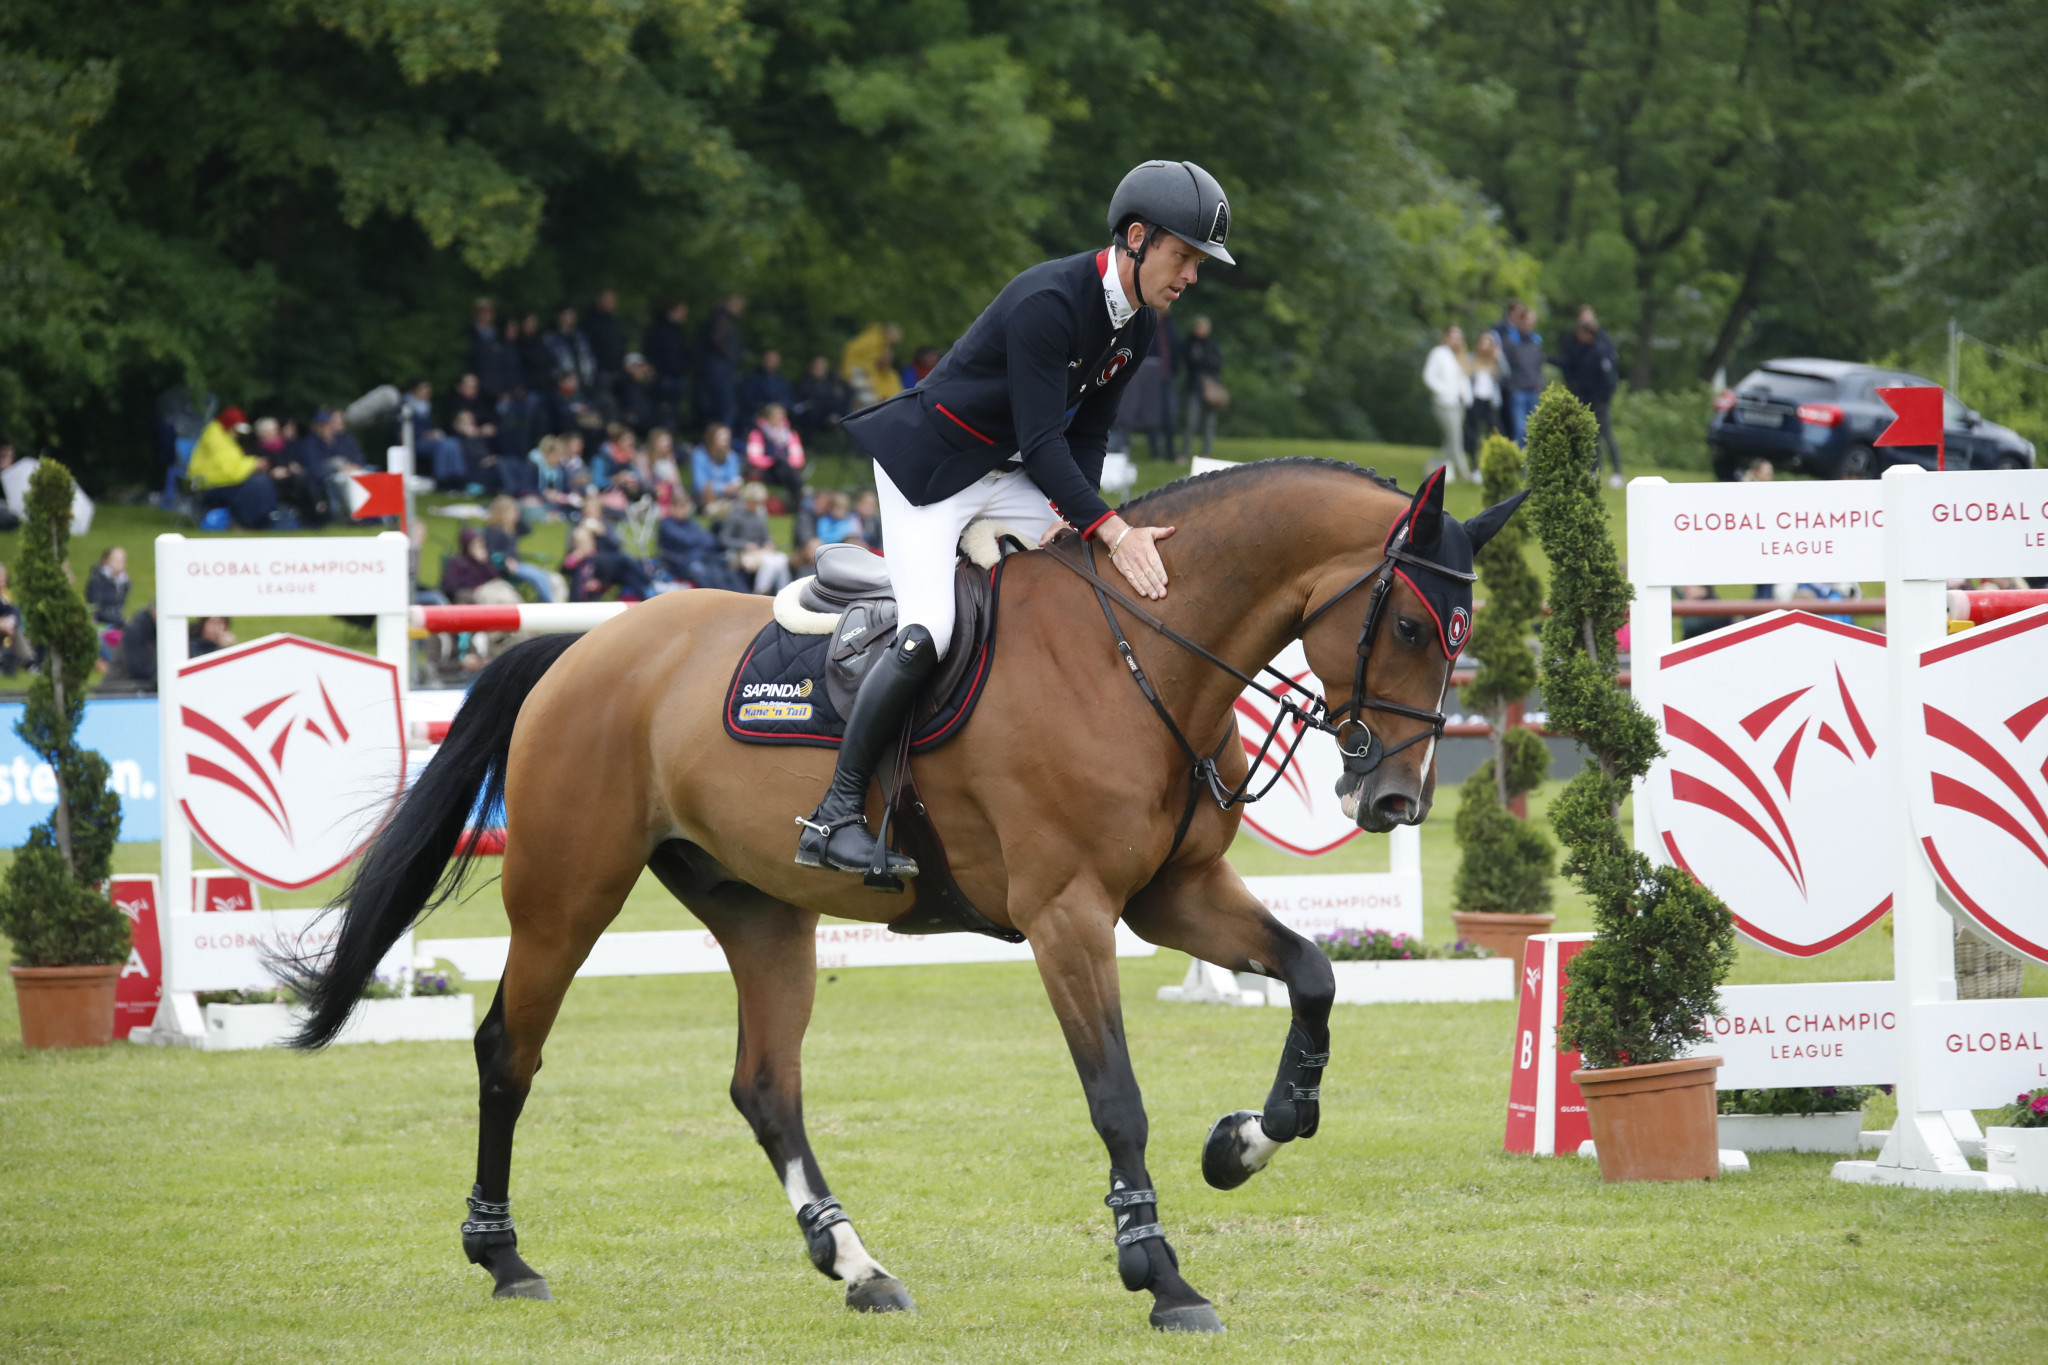 New York Empire favourites to take Longines GCL gold in Hamburg